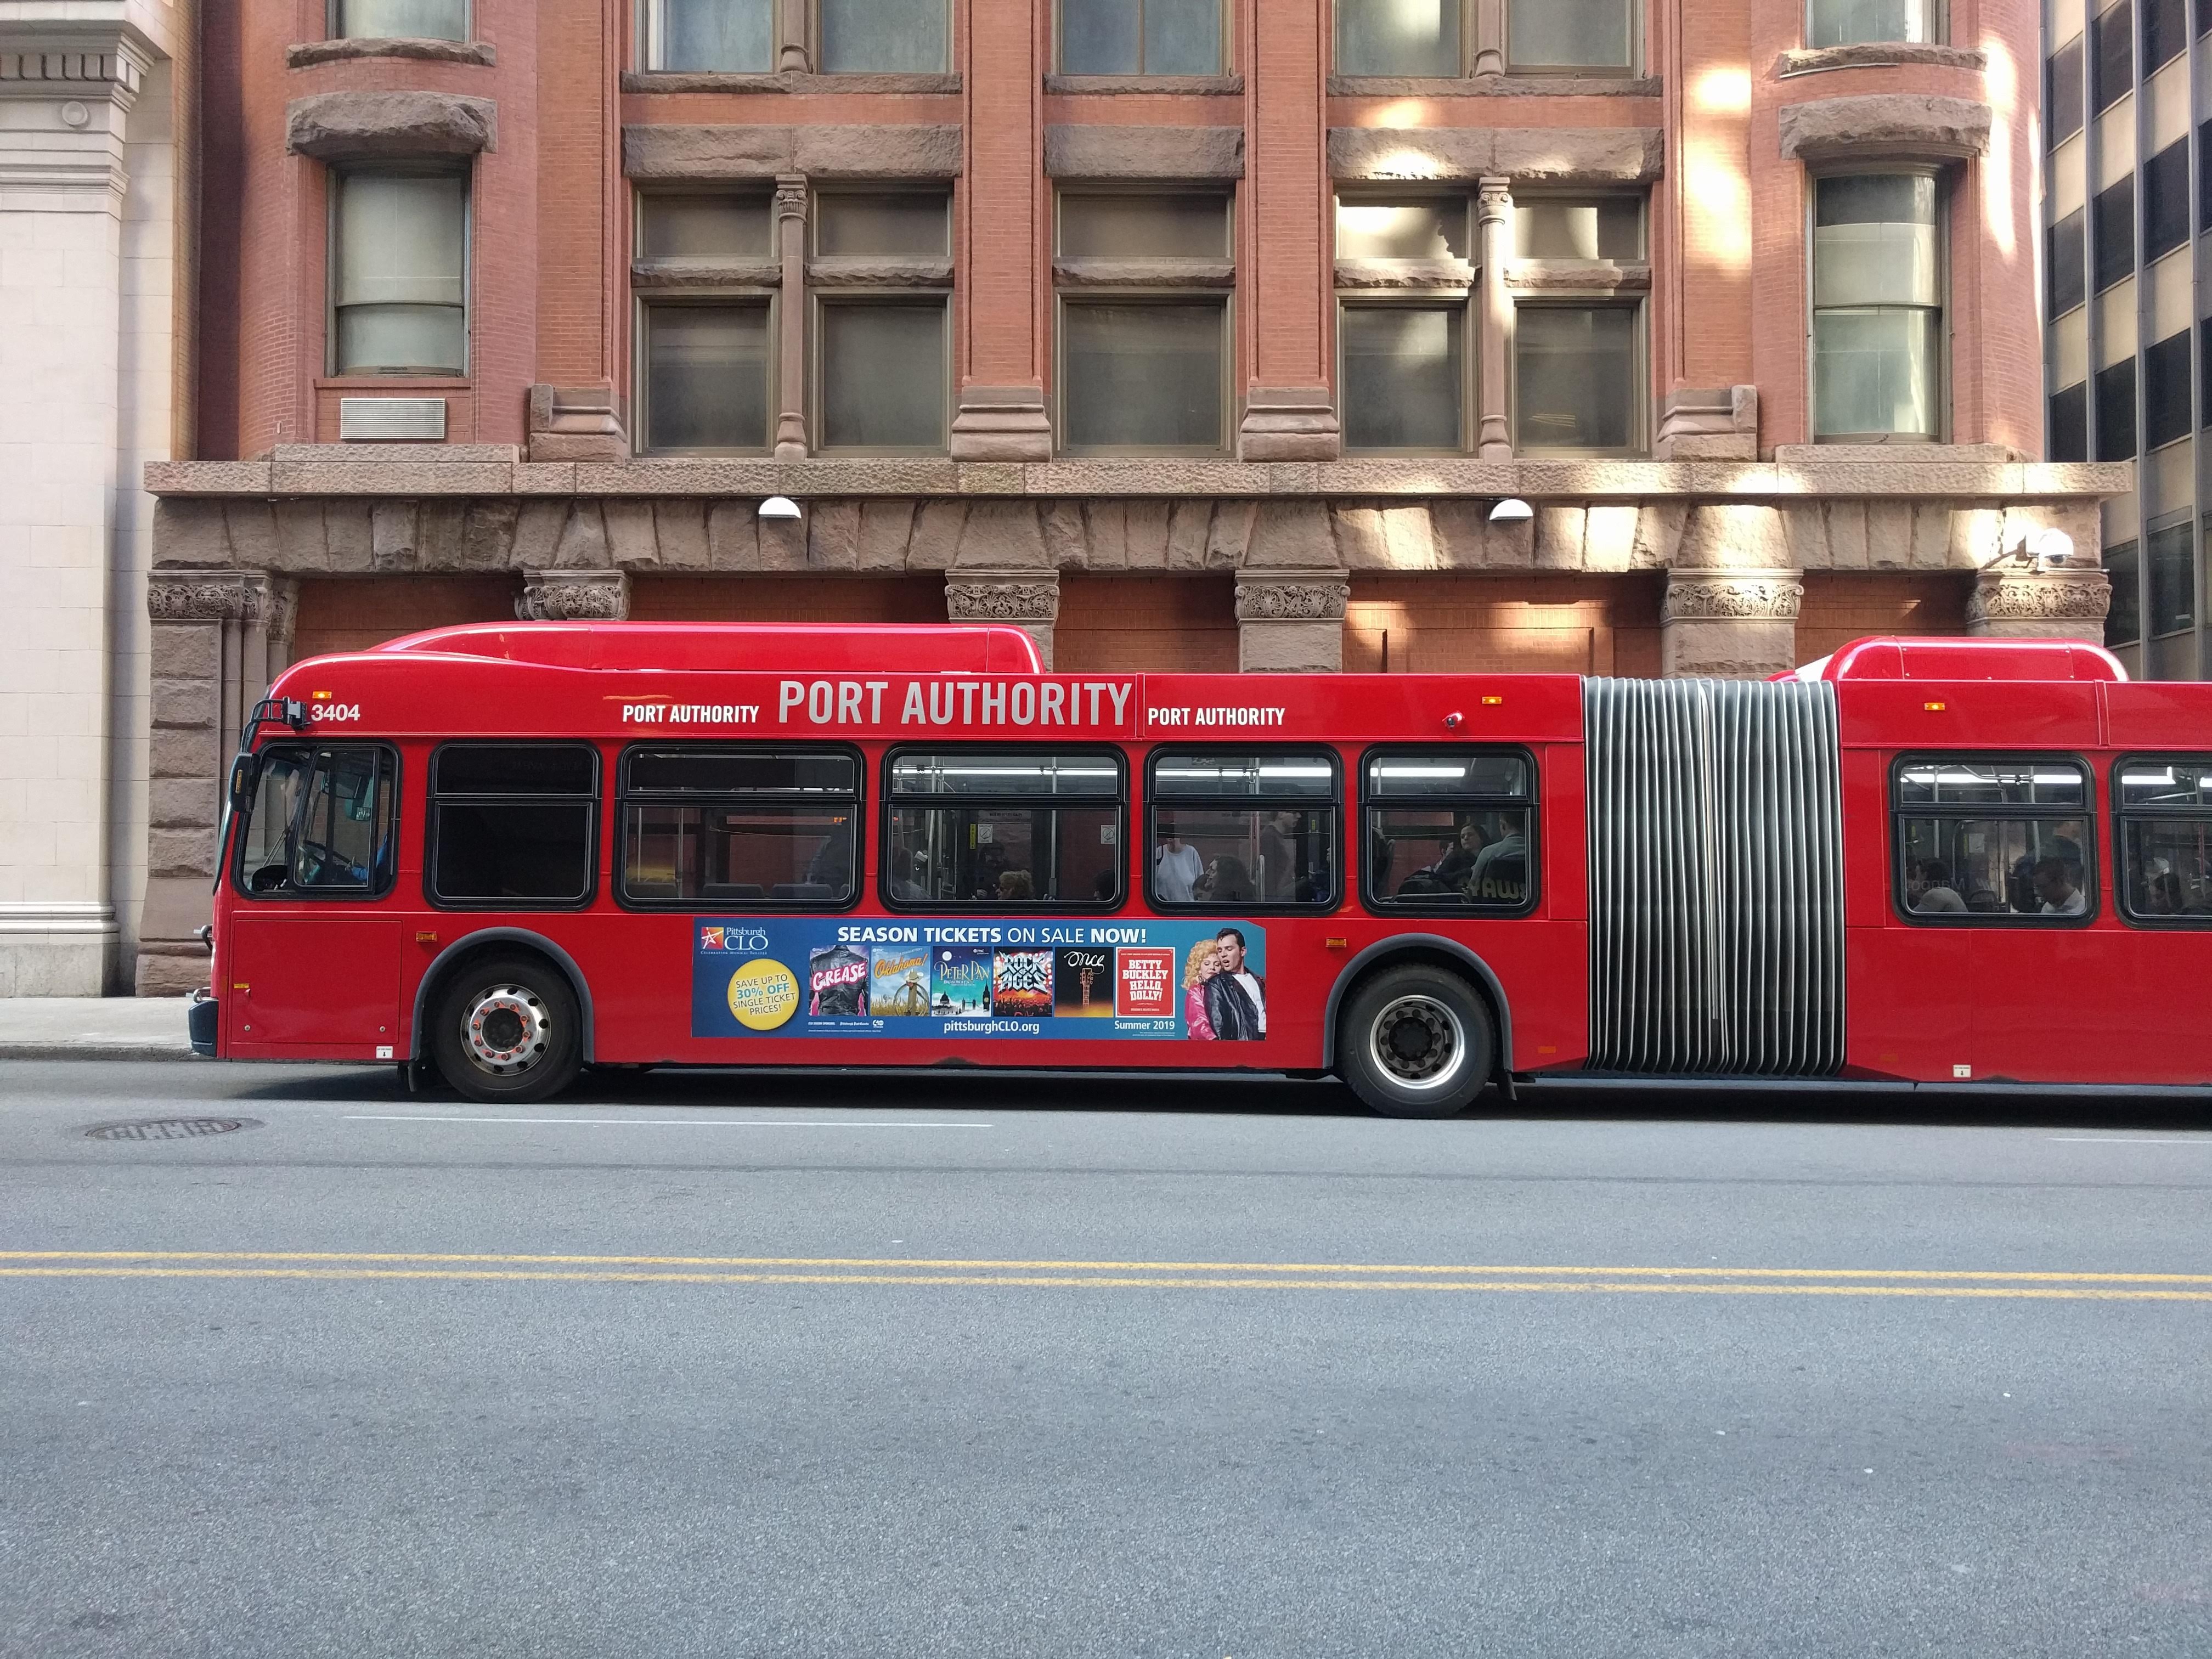 Port Authority announces reduction in bus service, citing